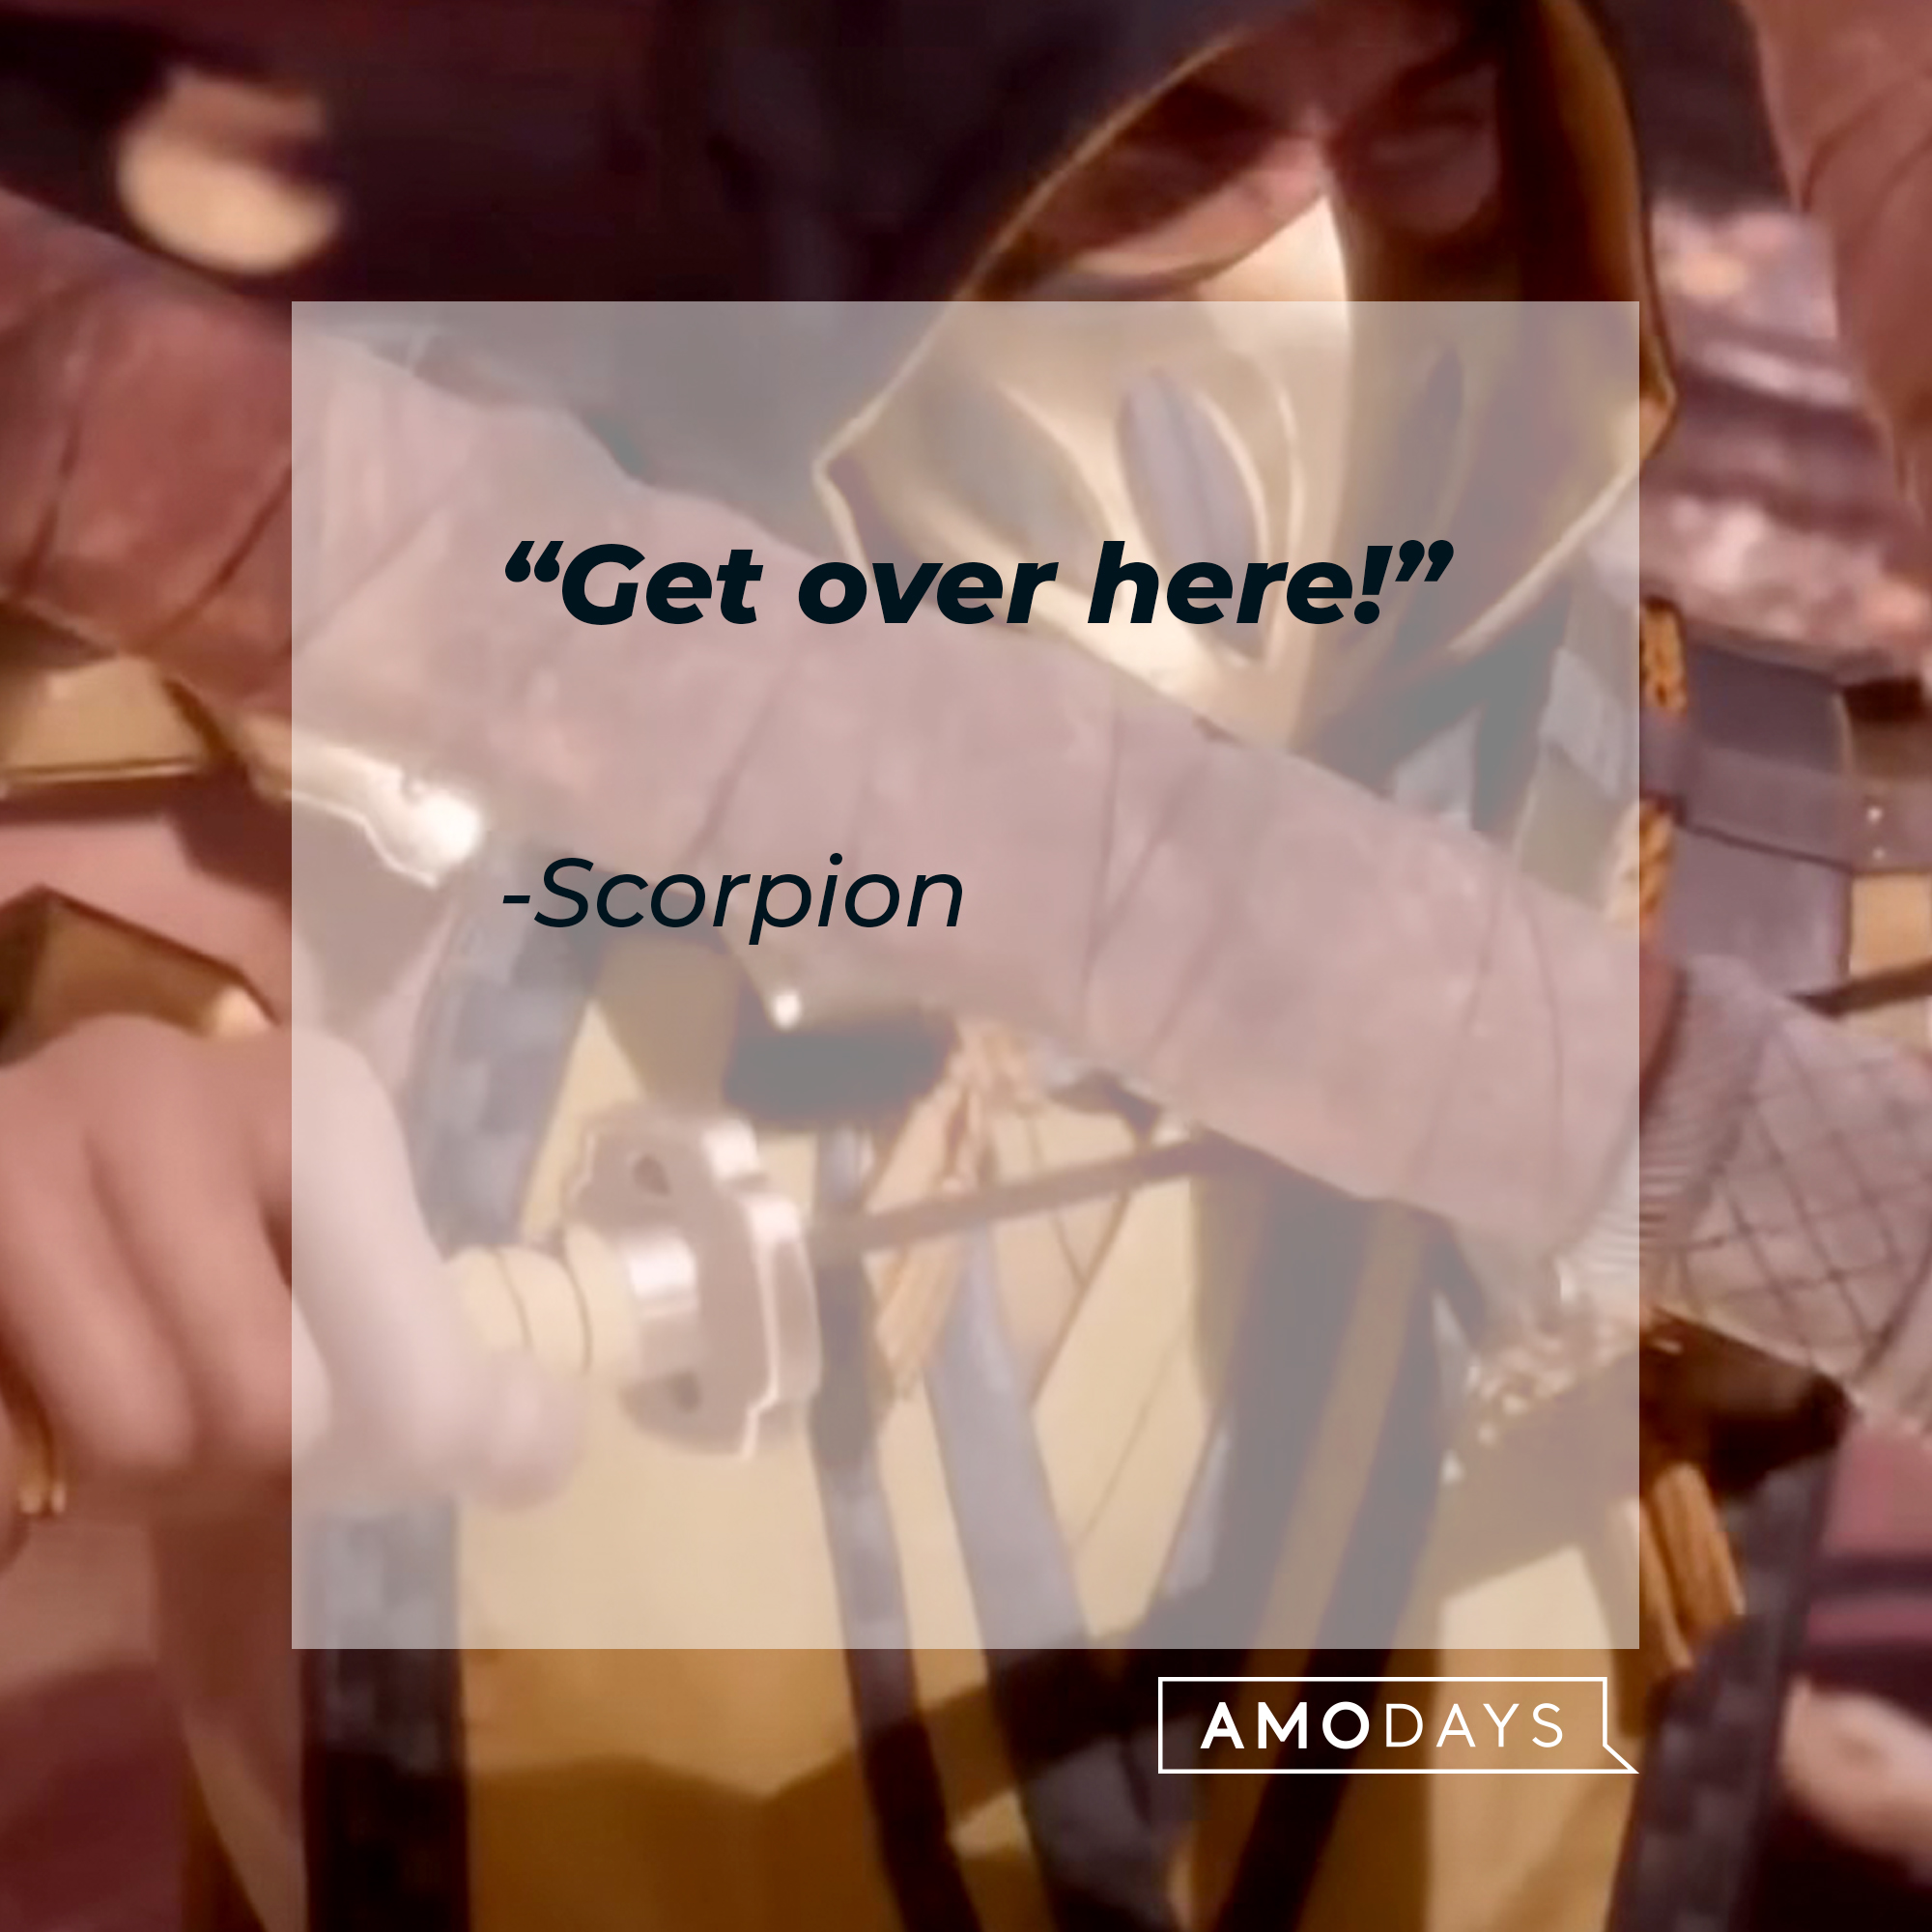 An image of Scorpion with his quote: "Get over here!” | Source: facebook.com/MortalKombatUK